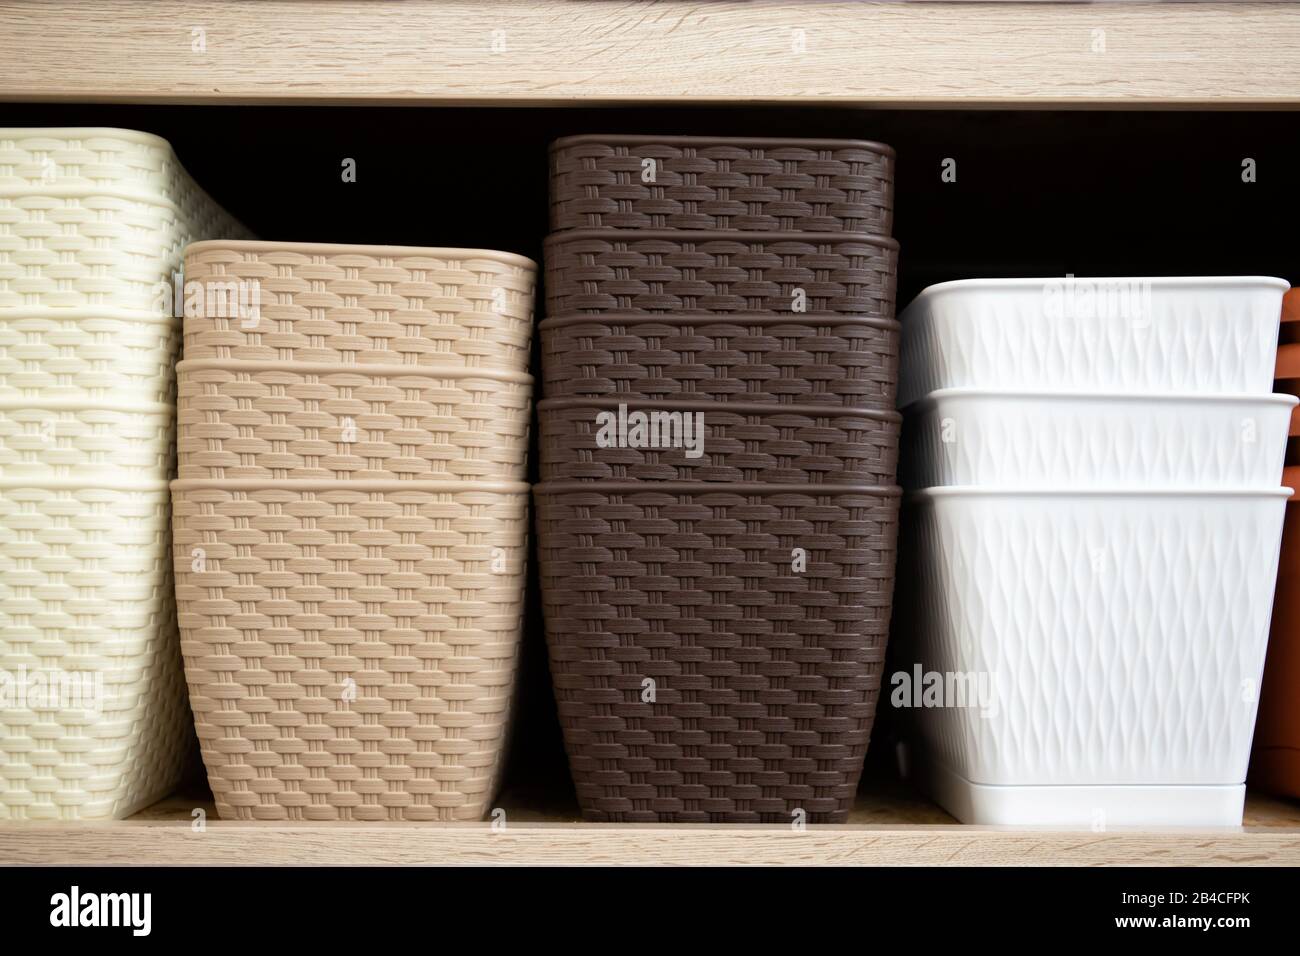 Shelf with plastic flower pots. Stock for flowers Stock Photo